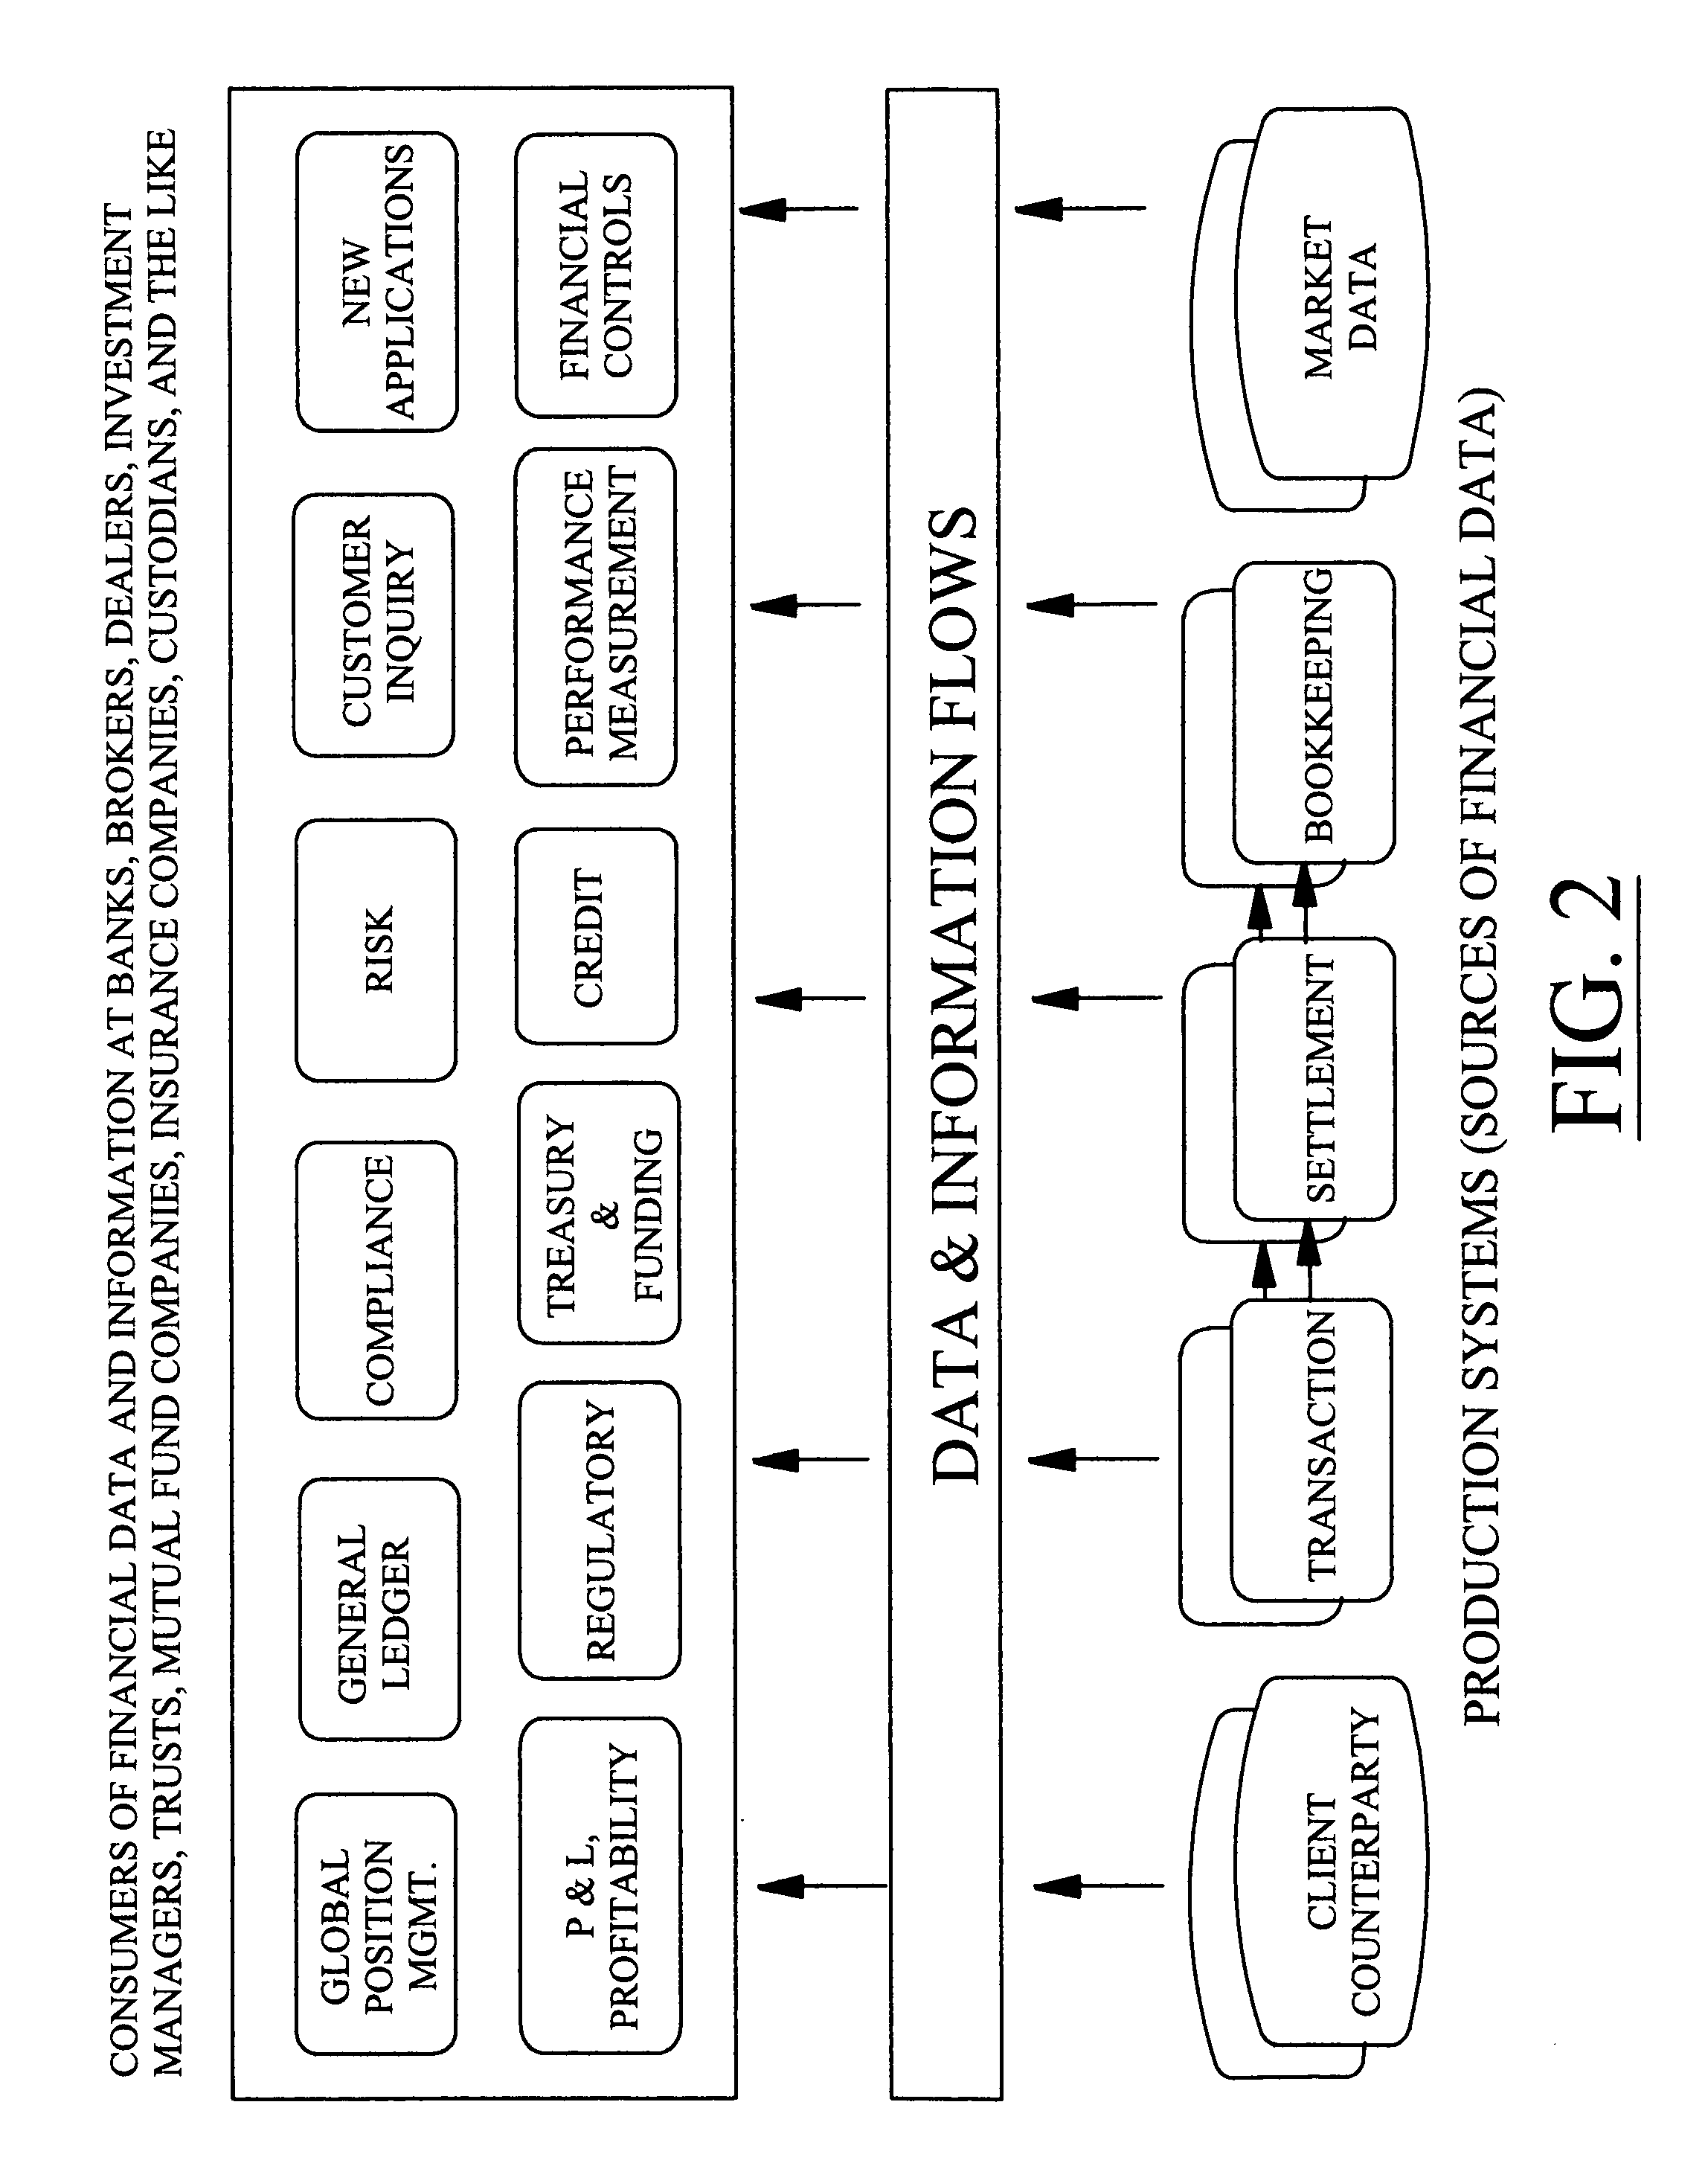 Financial data reporting system with alert notification feature and free-form searching capability